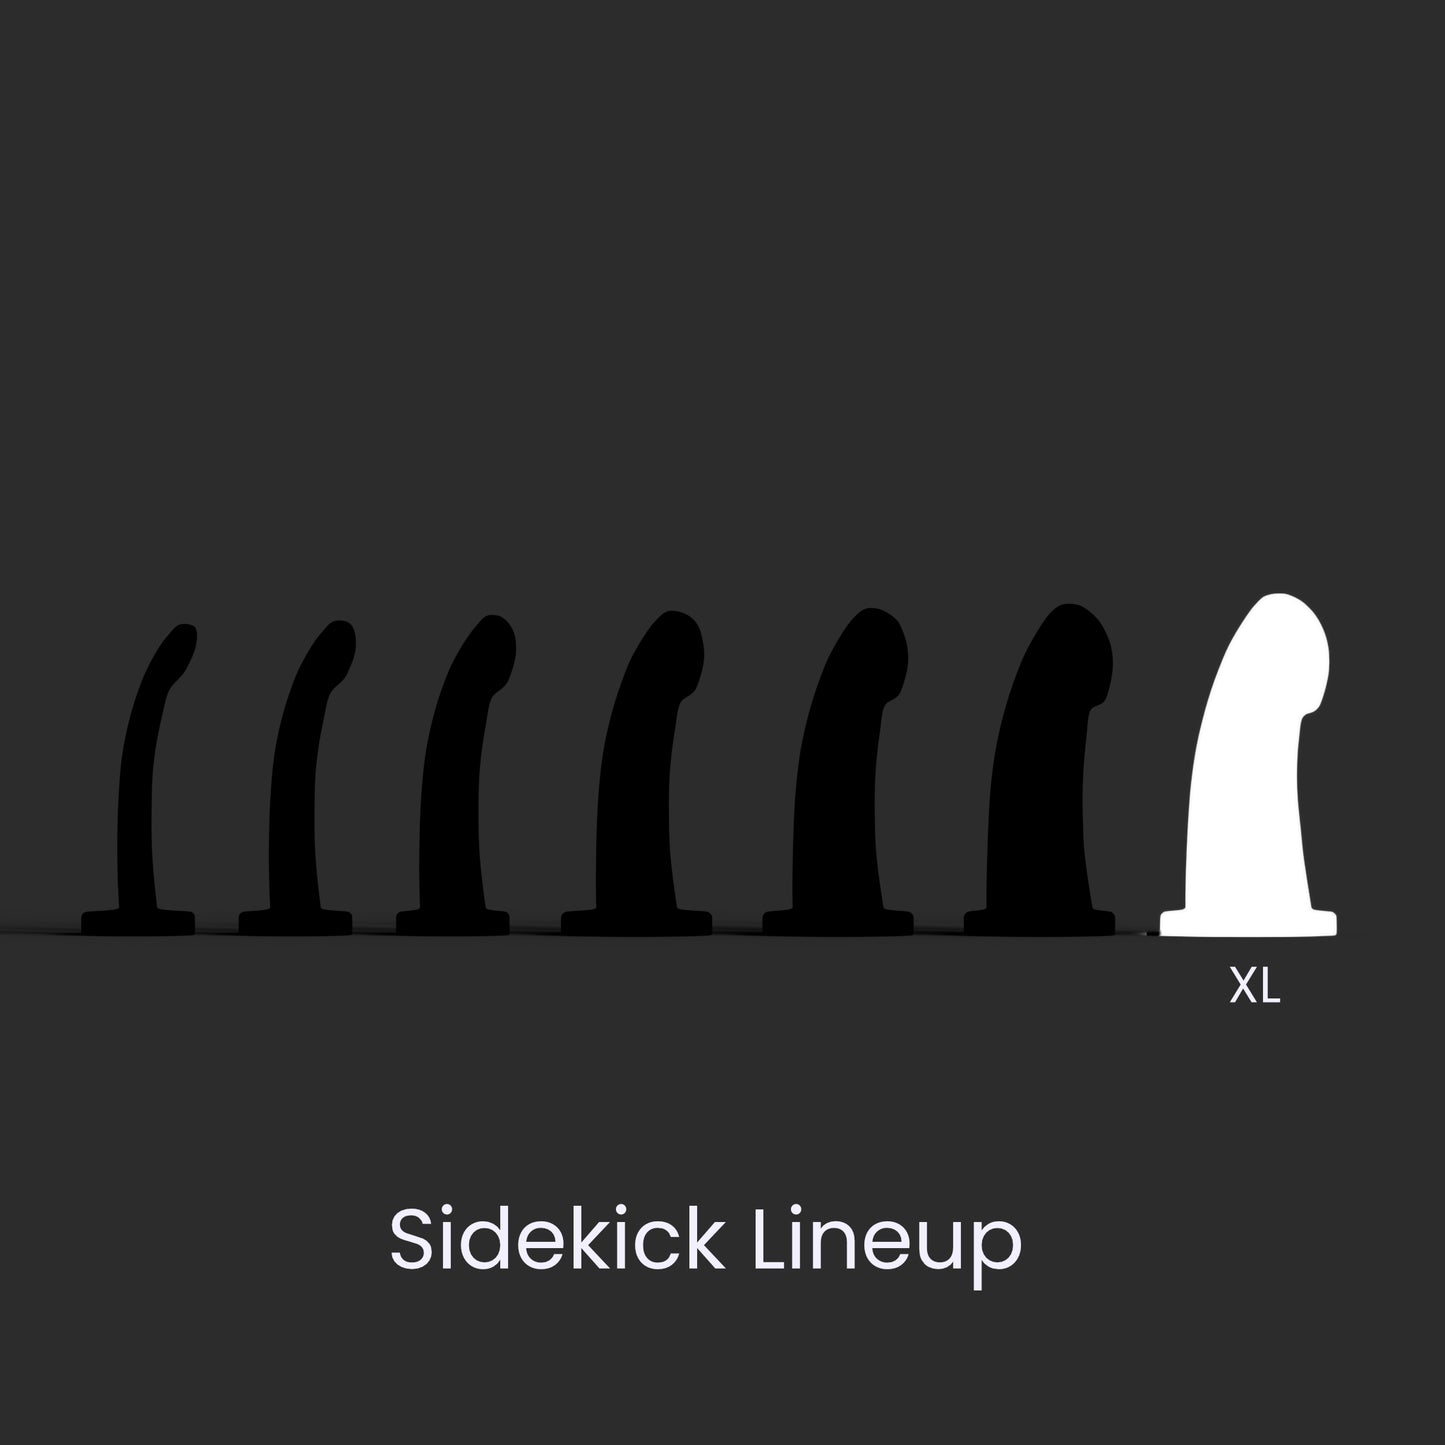 Diagram showing the seven Sidekick models lined up left to right smallest to largest, and the Extra Large in the rightmost position.